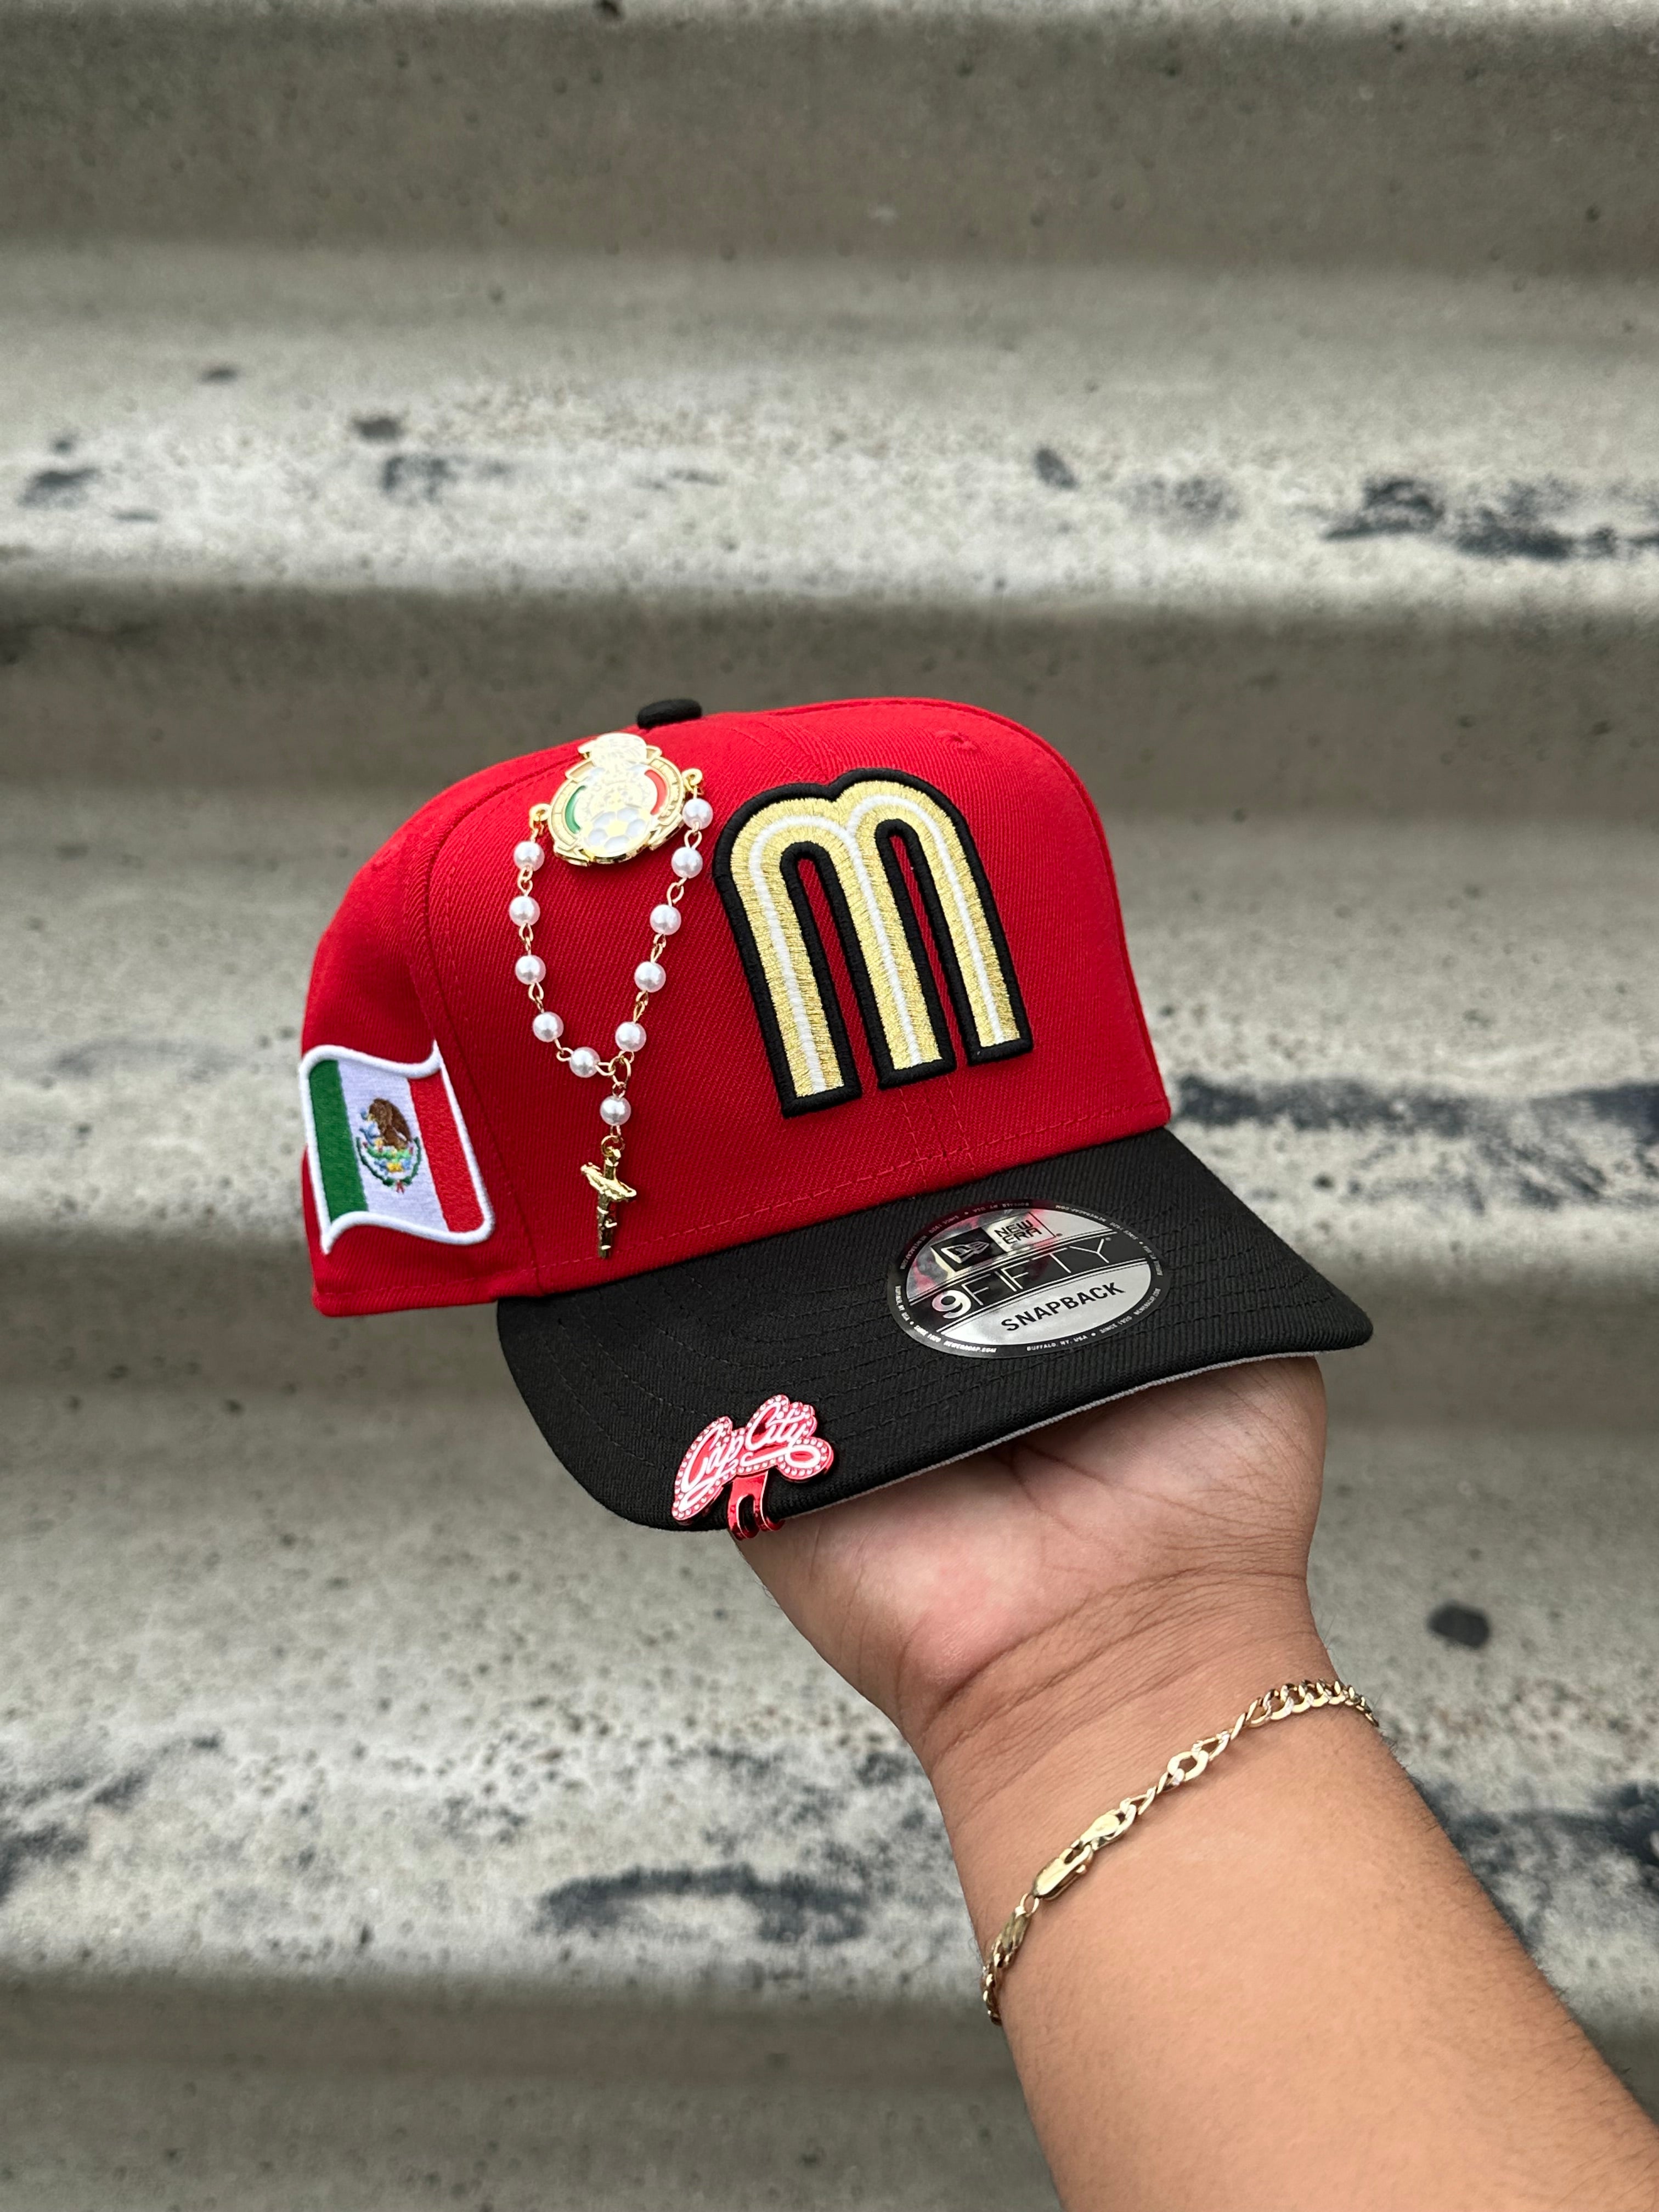 NEW ERA EXCLUSIVE 9FIFTY RED/BLACK MEXICO SNAPBACK W/ MEXICO FLAG SIDE PATCH